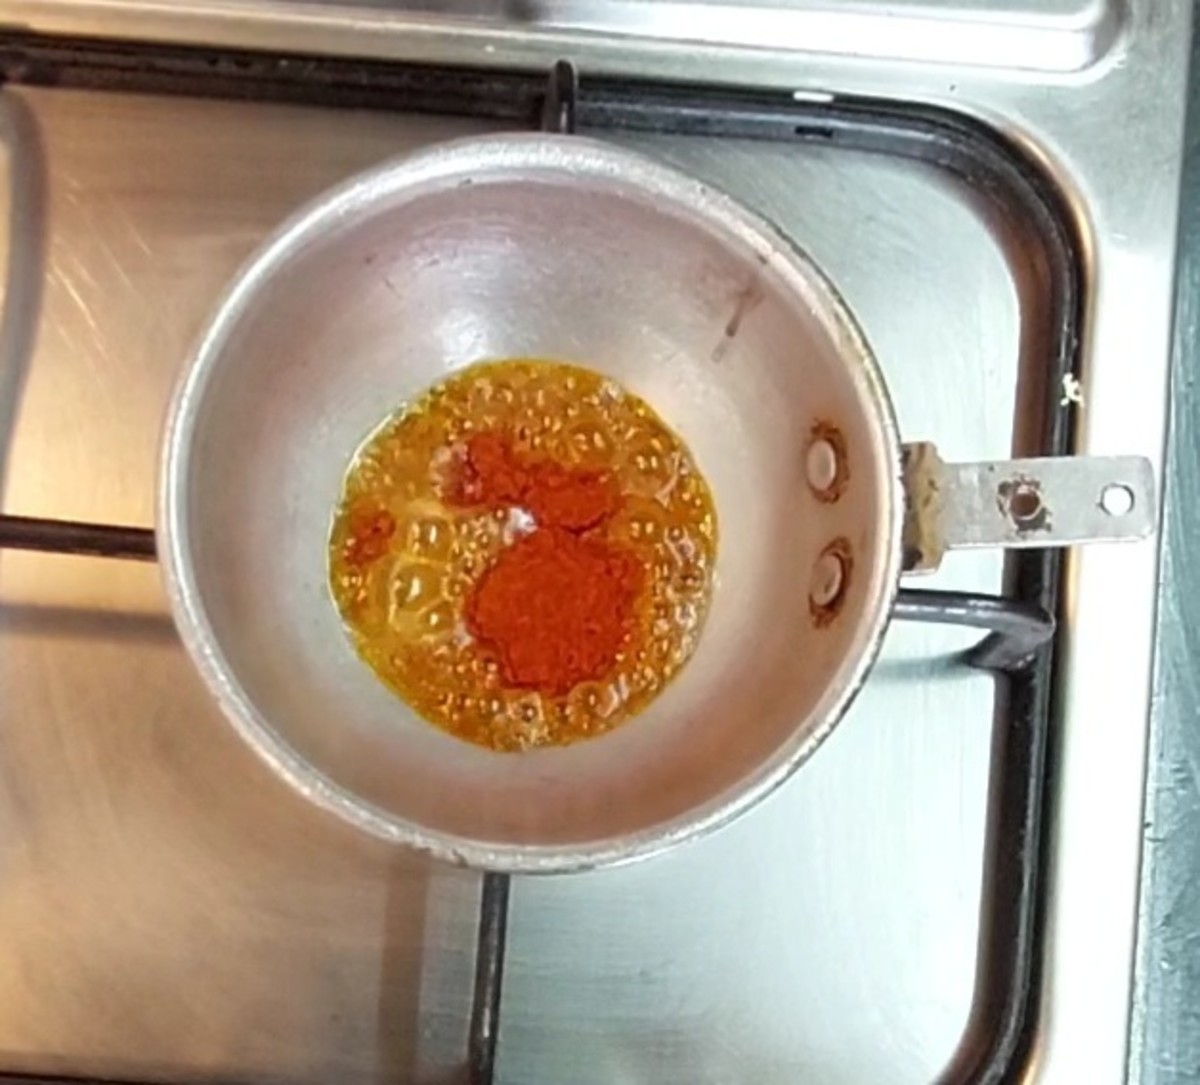 In a frying pan, heat 1 tablespoon ghee and splutter 1 teaspoon cumin seeds. Add 1 teaspoon red chili powder, mix and switch off the flame.